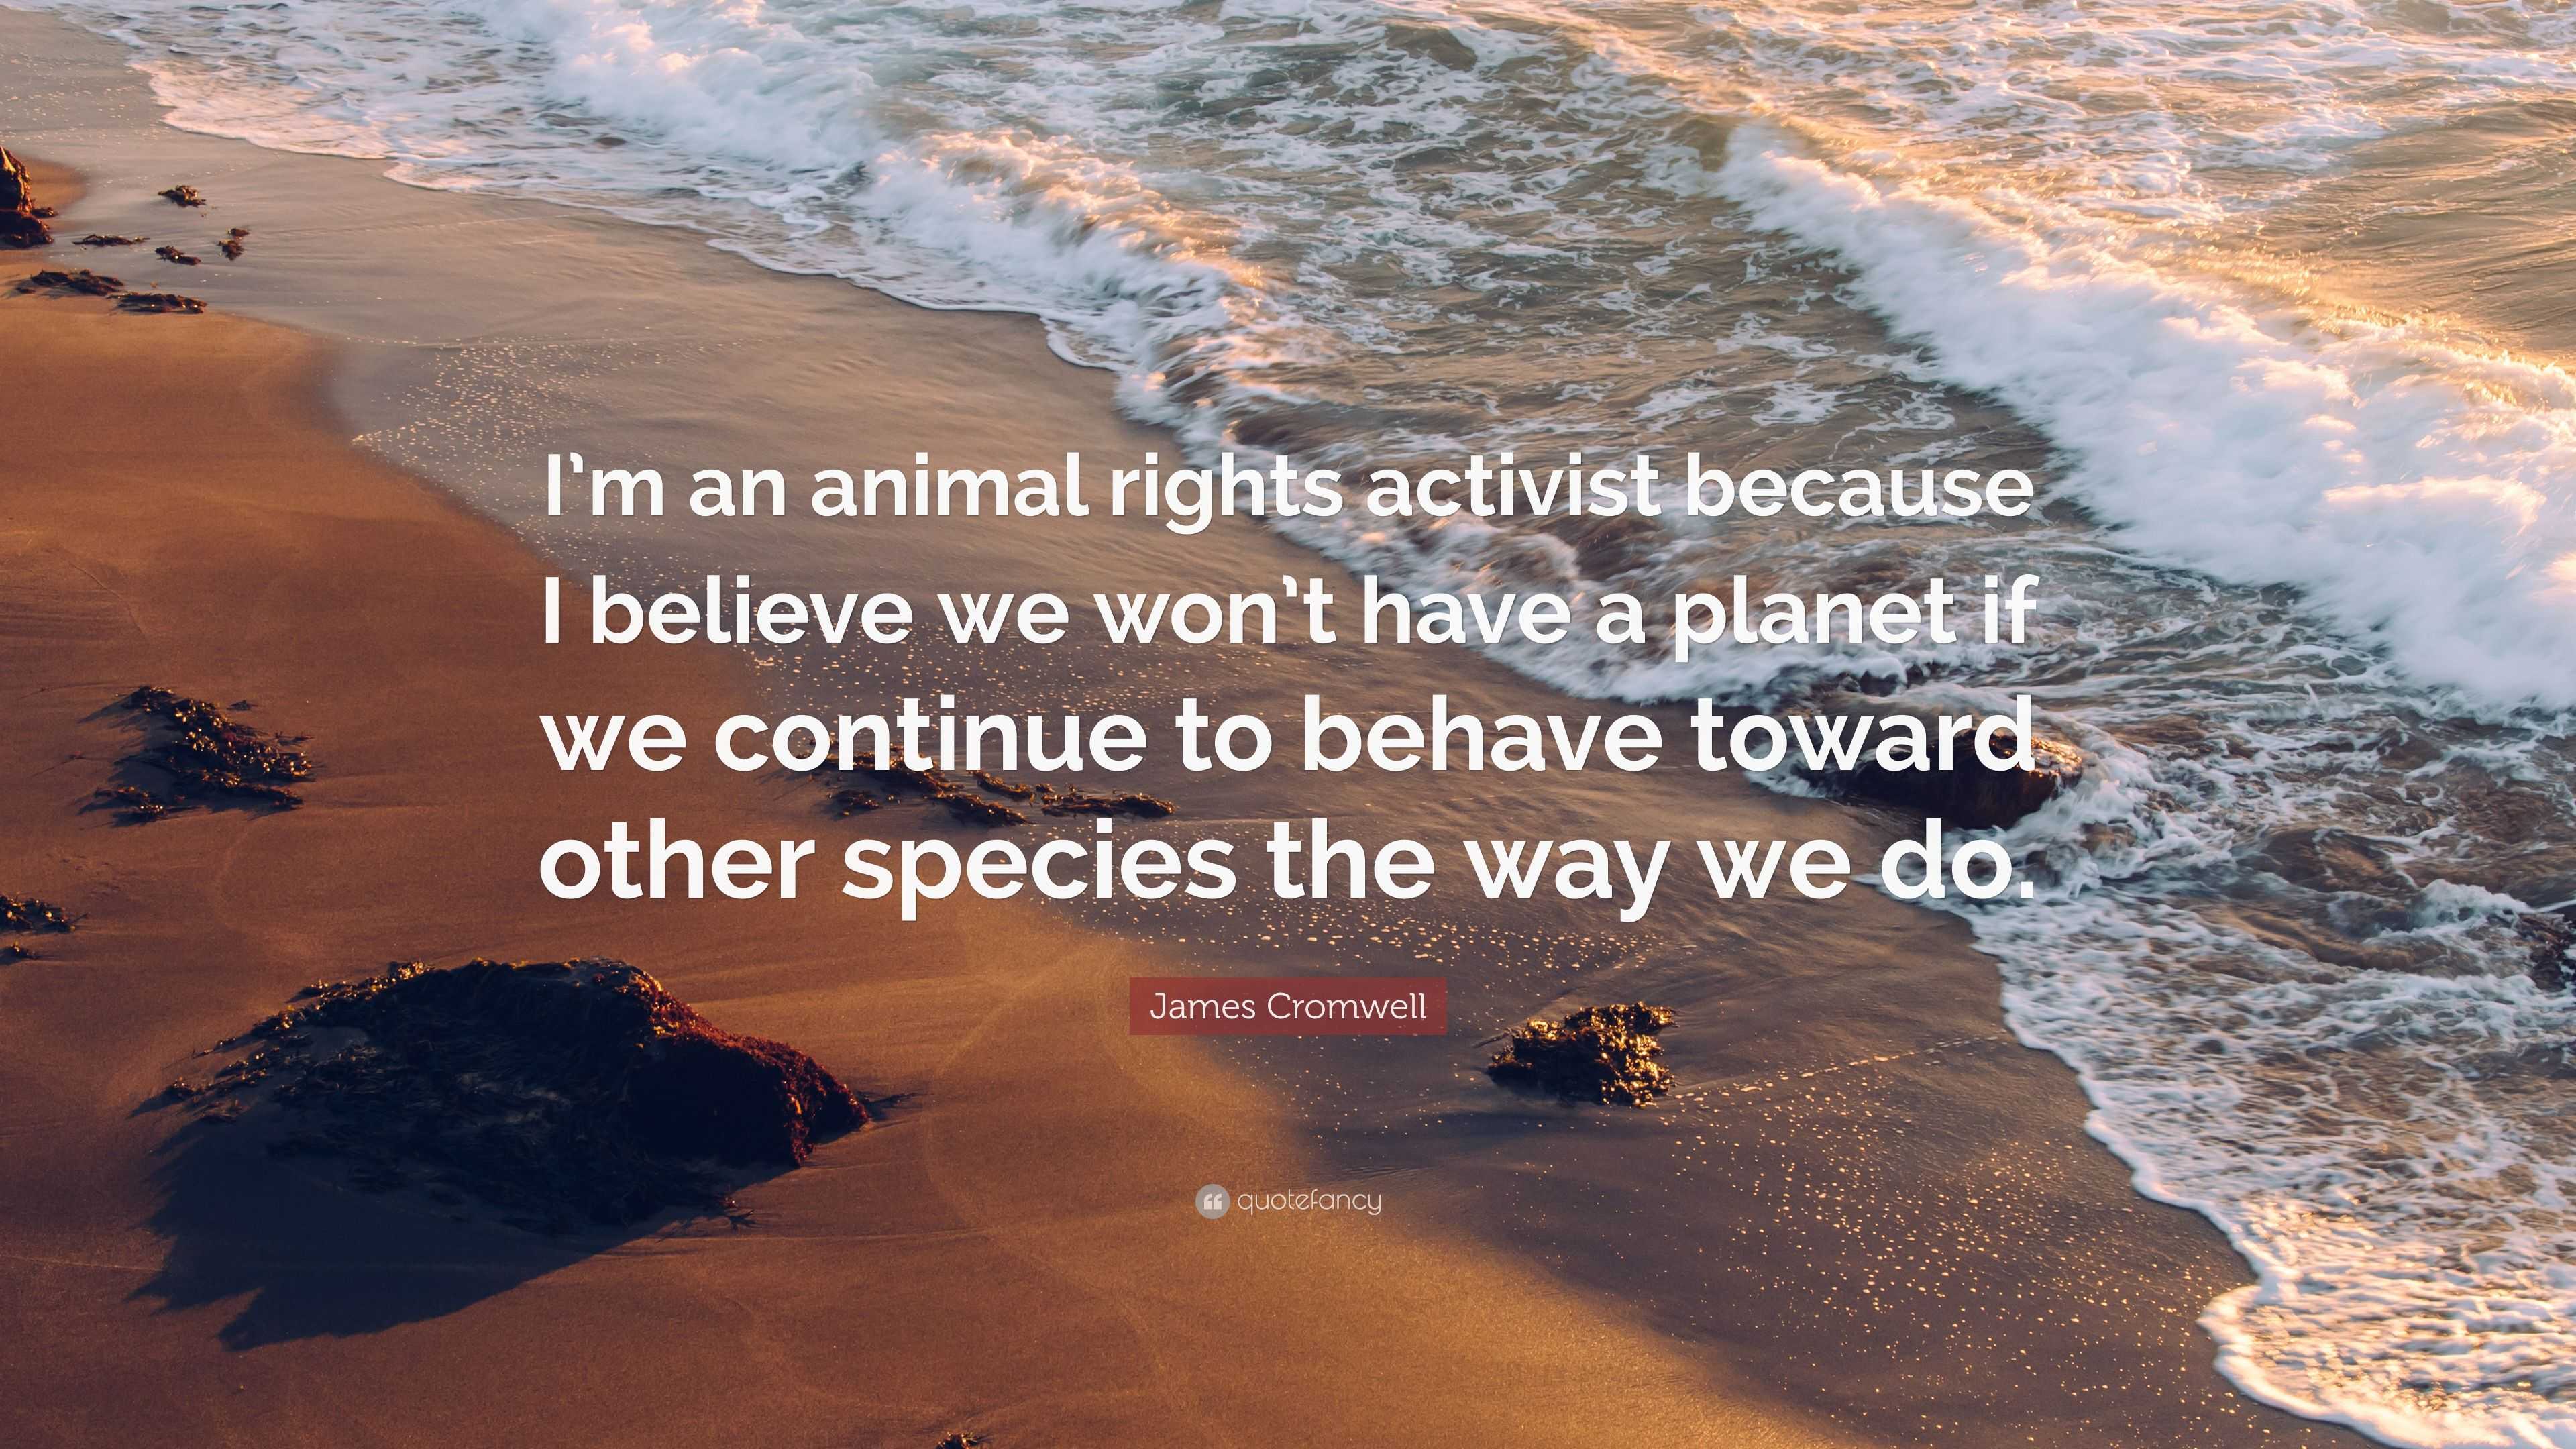 James Cromwell Quote: “I’m an animal rights activist because I believe